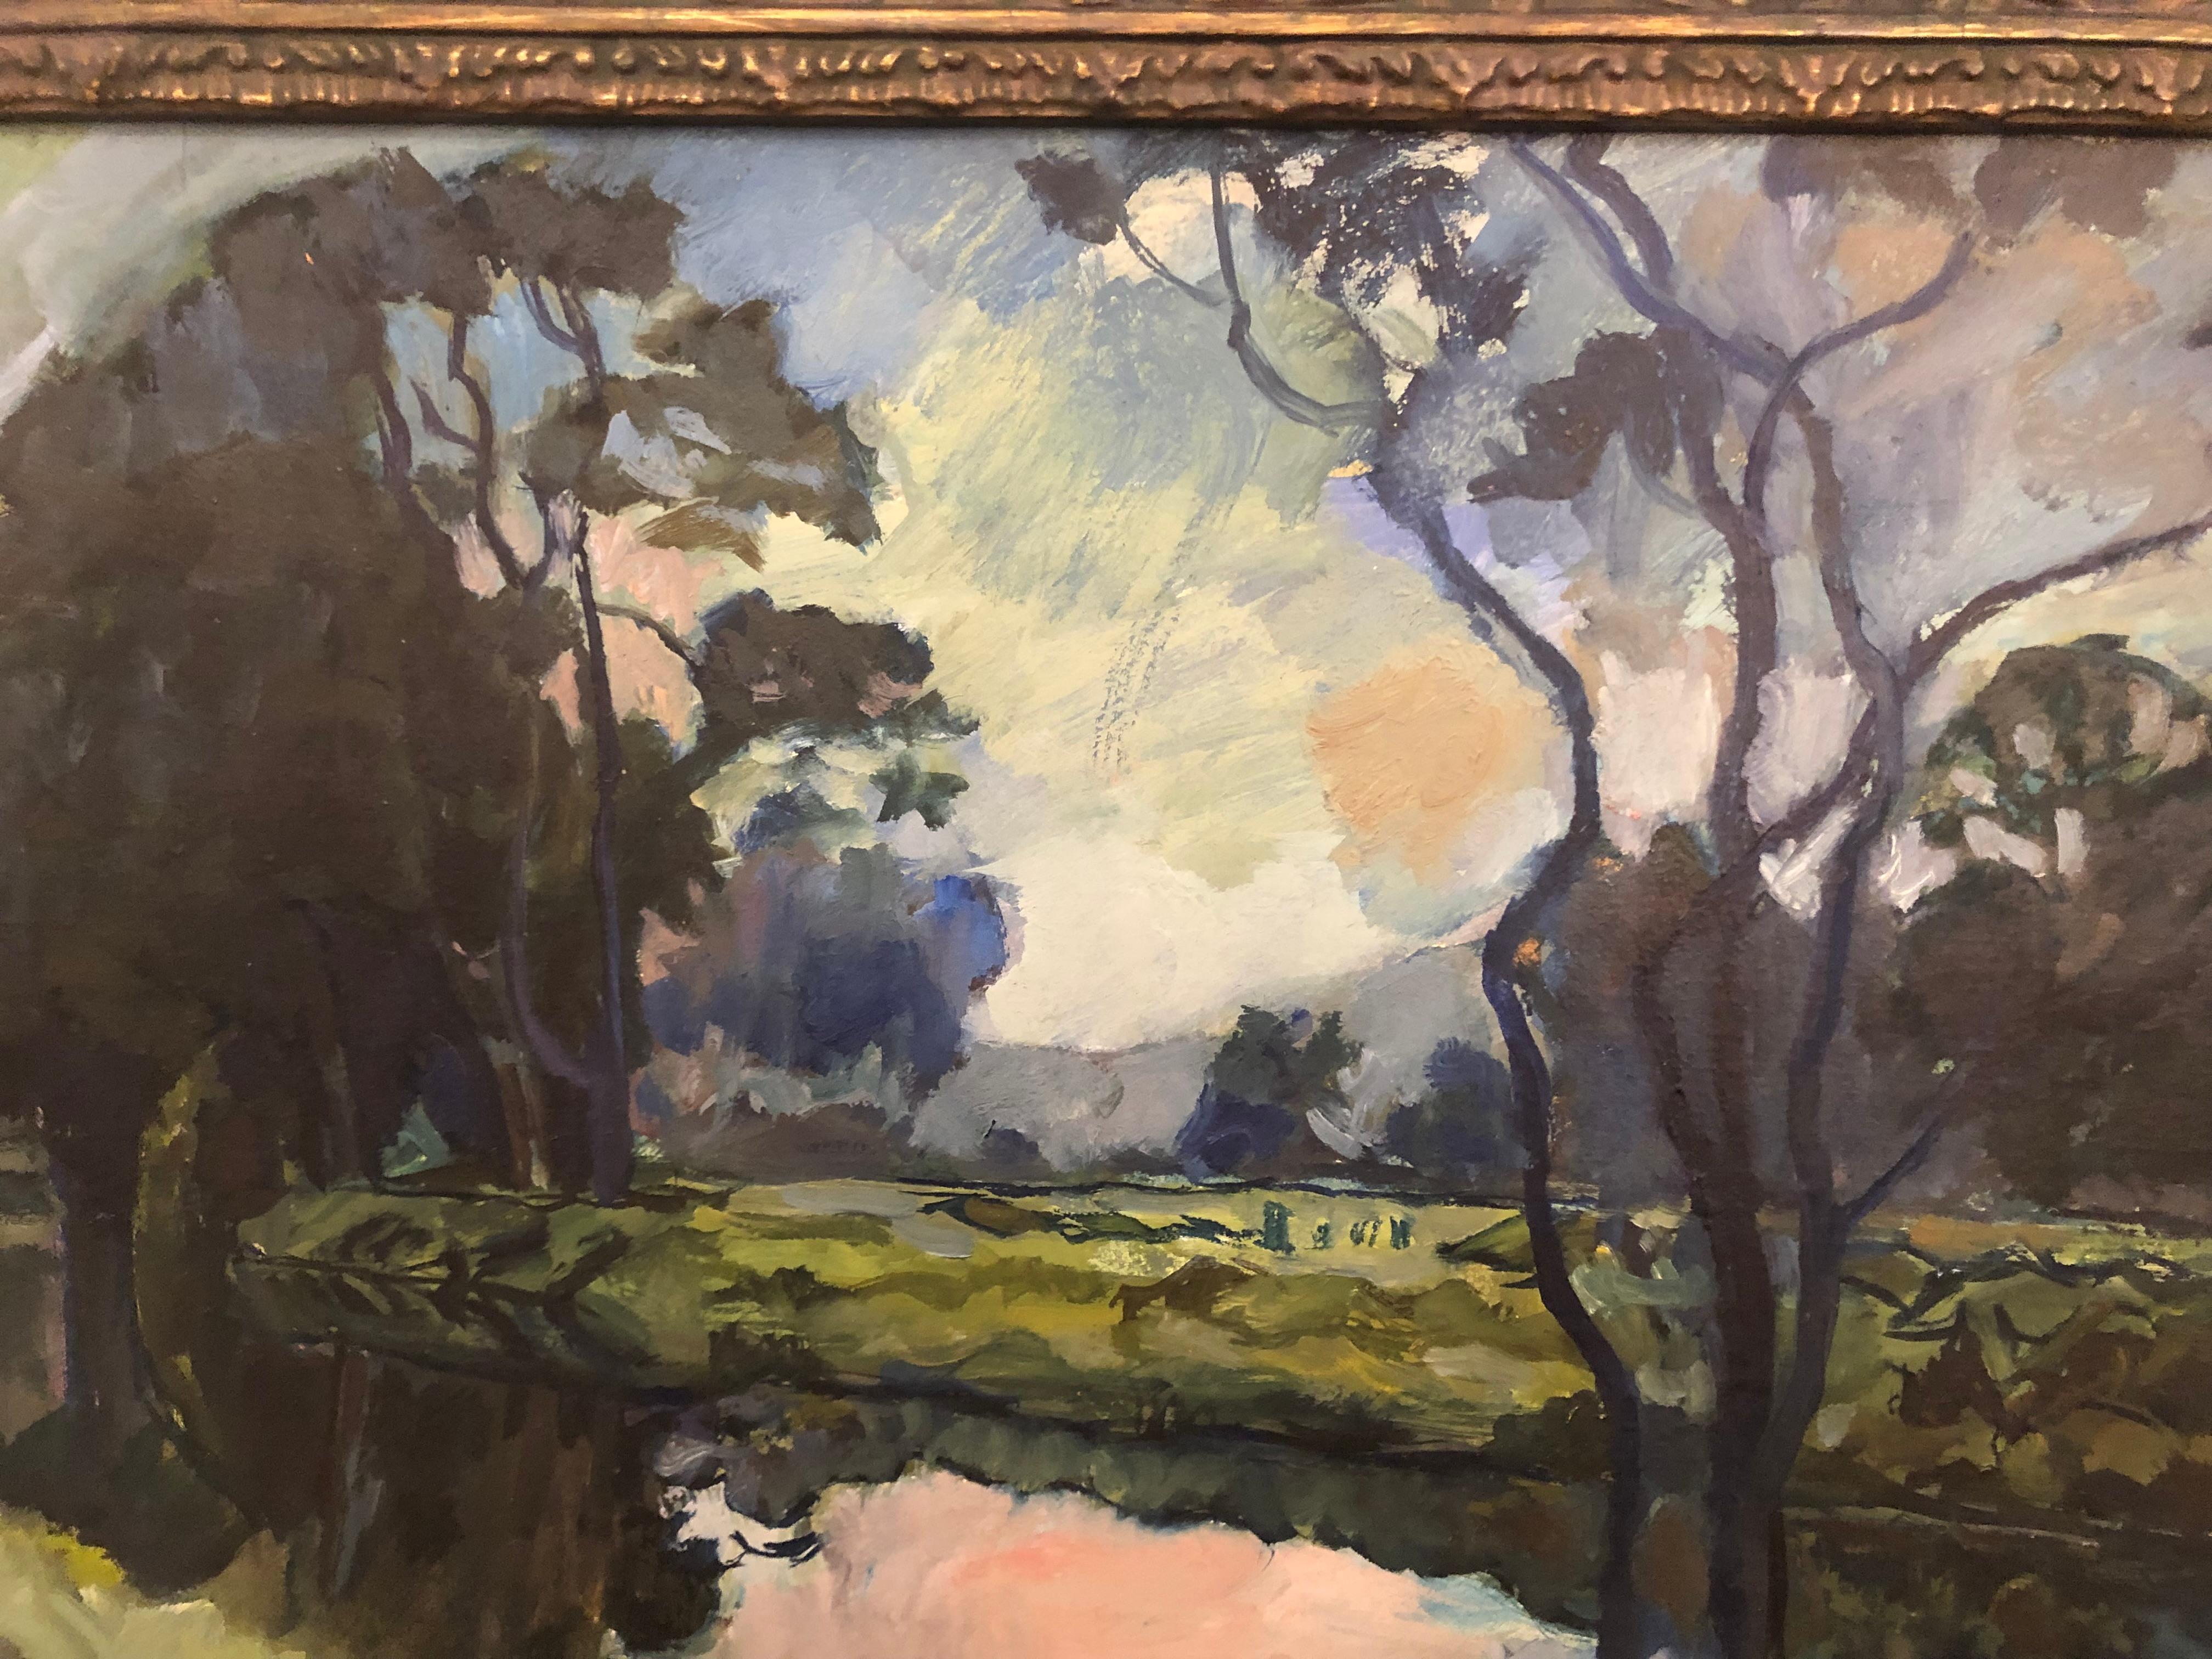 Wood Gorgeous Landscape painting by Paul Nietsche, Irish,  Oil on Panel, 1940